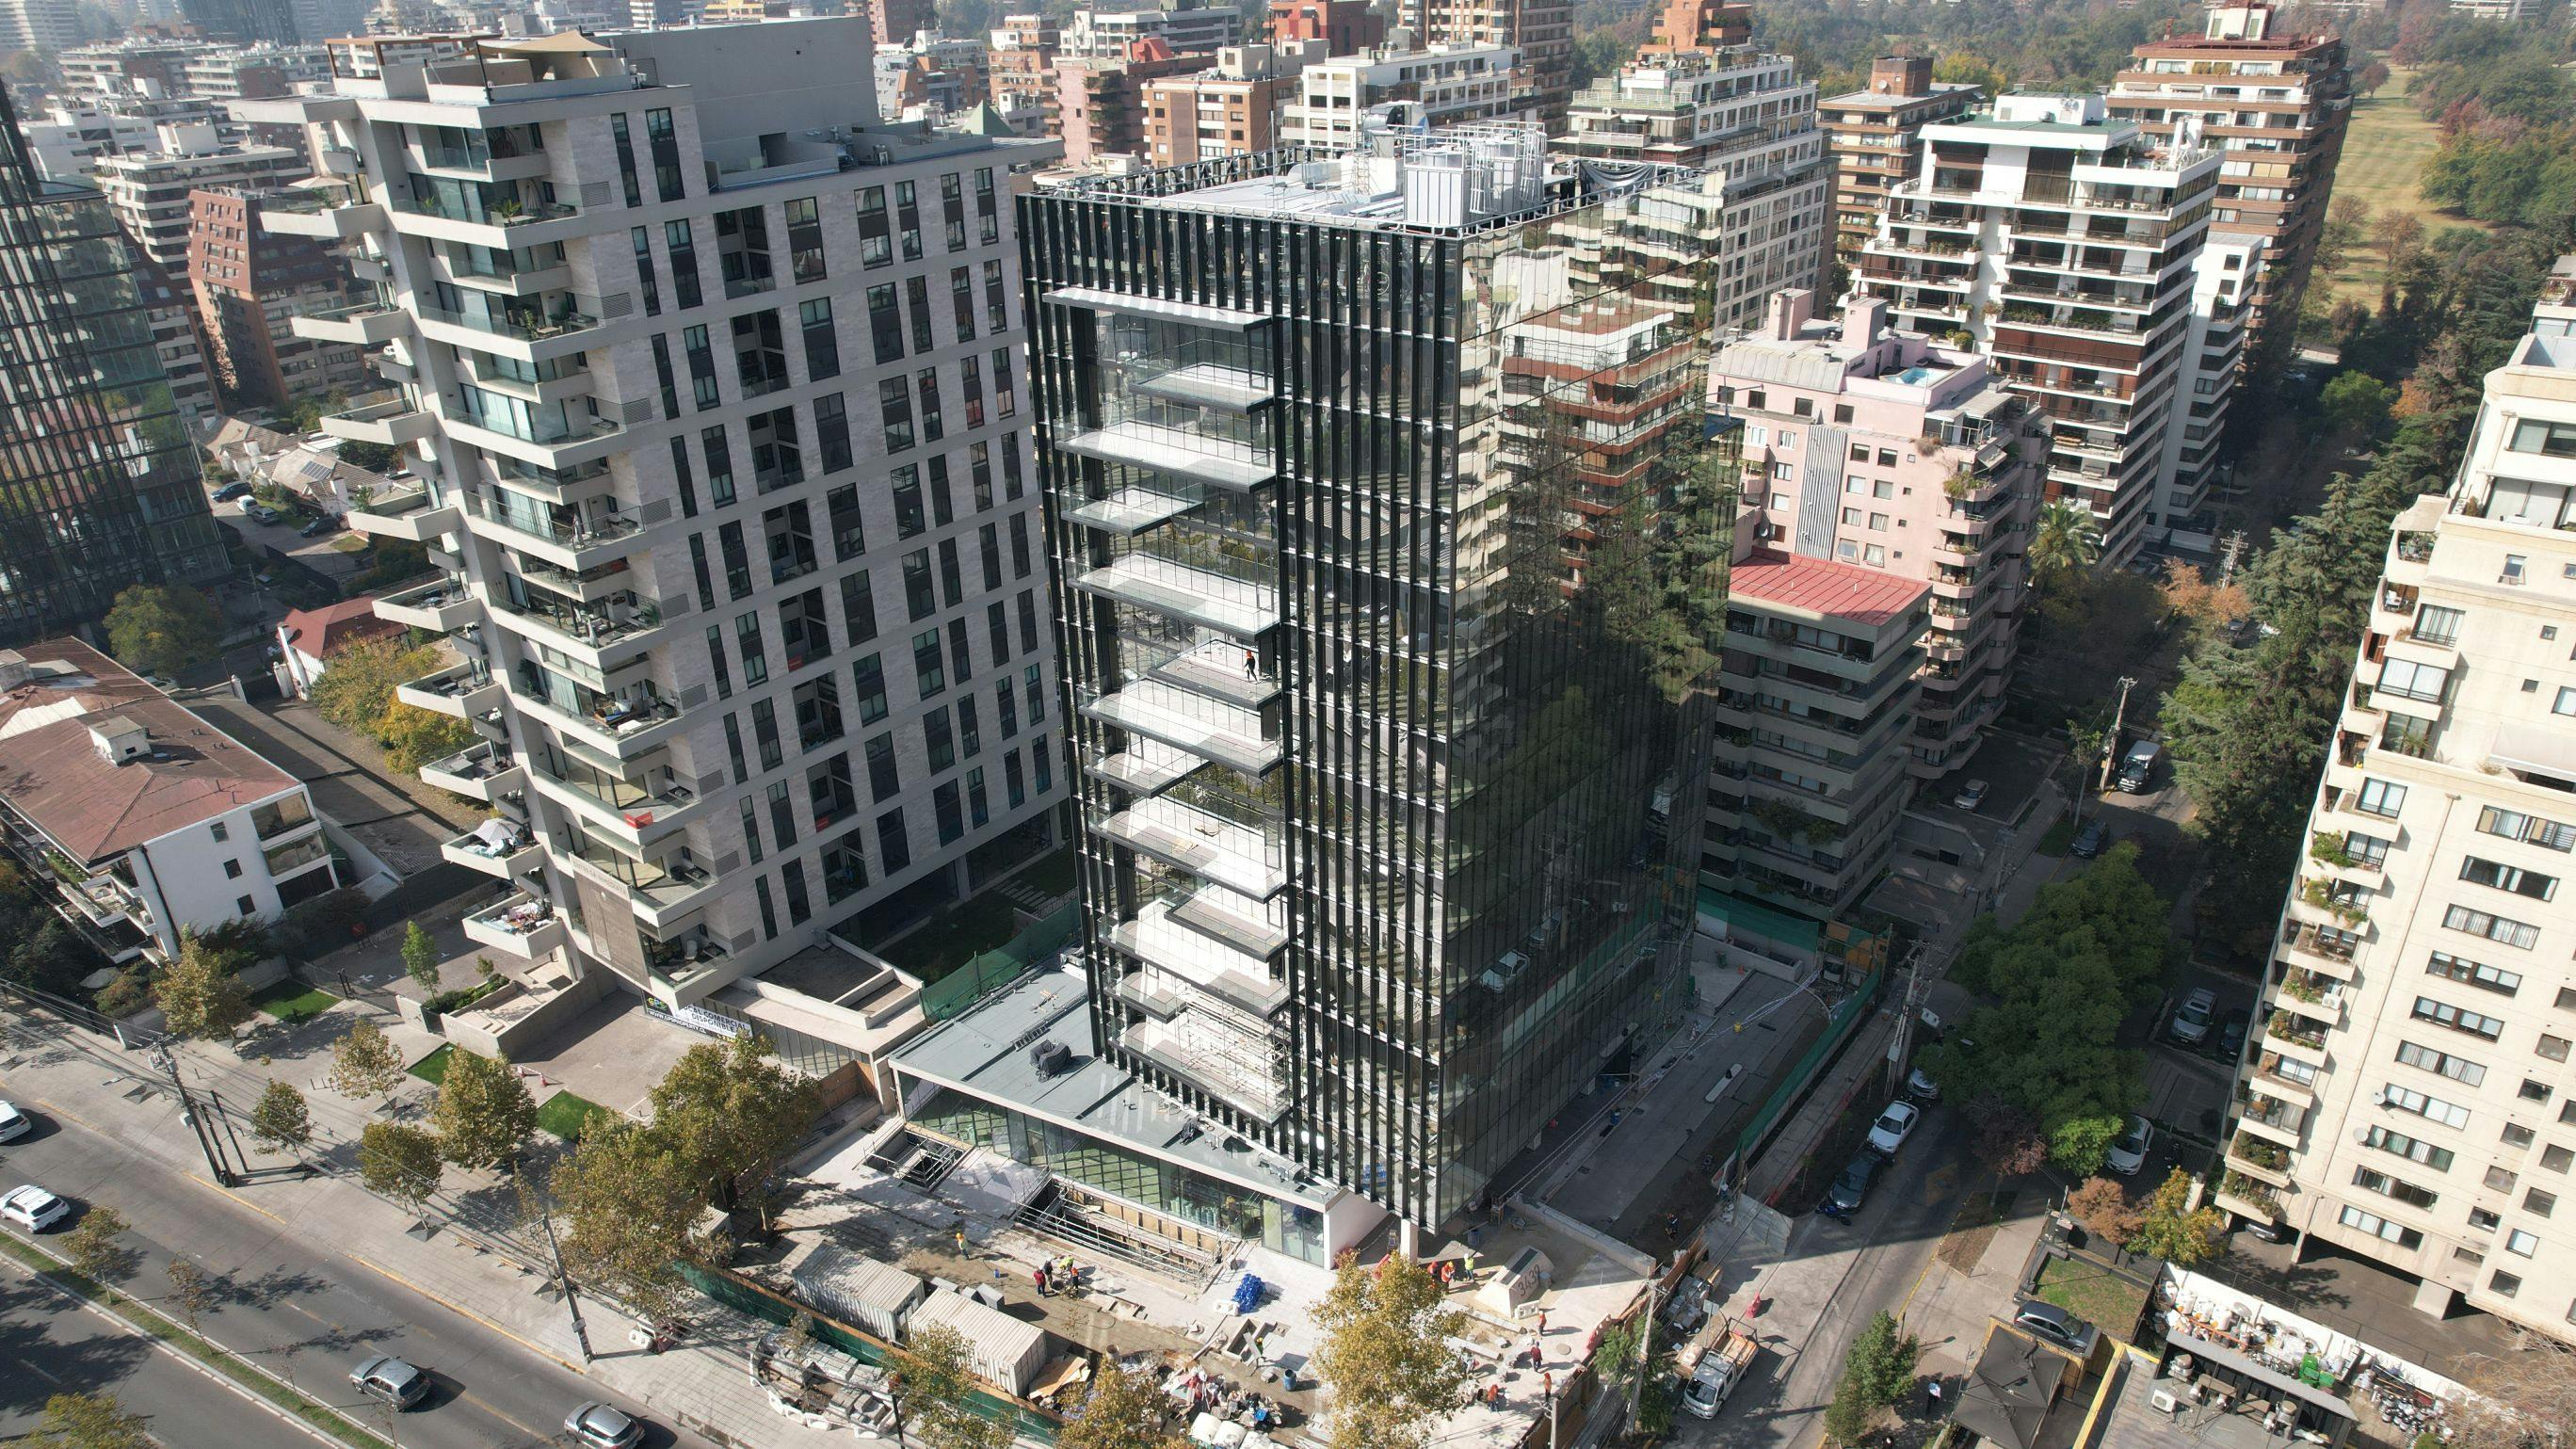 MoDe's Metlife Vitacura 3435, a 14-story, LEED-certified, state-of-the-art office building in Santiago, was successfully completed and delivered on time, earning widespread acclaim and marking a significant addition to the city's vibrant Vitacura neighborhood.